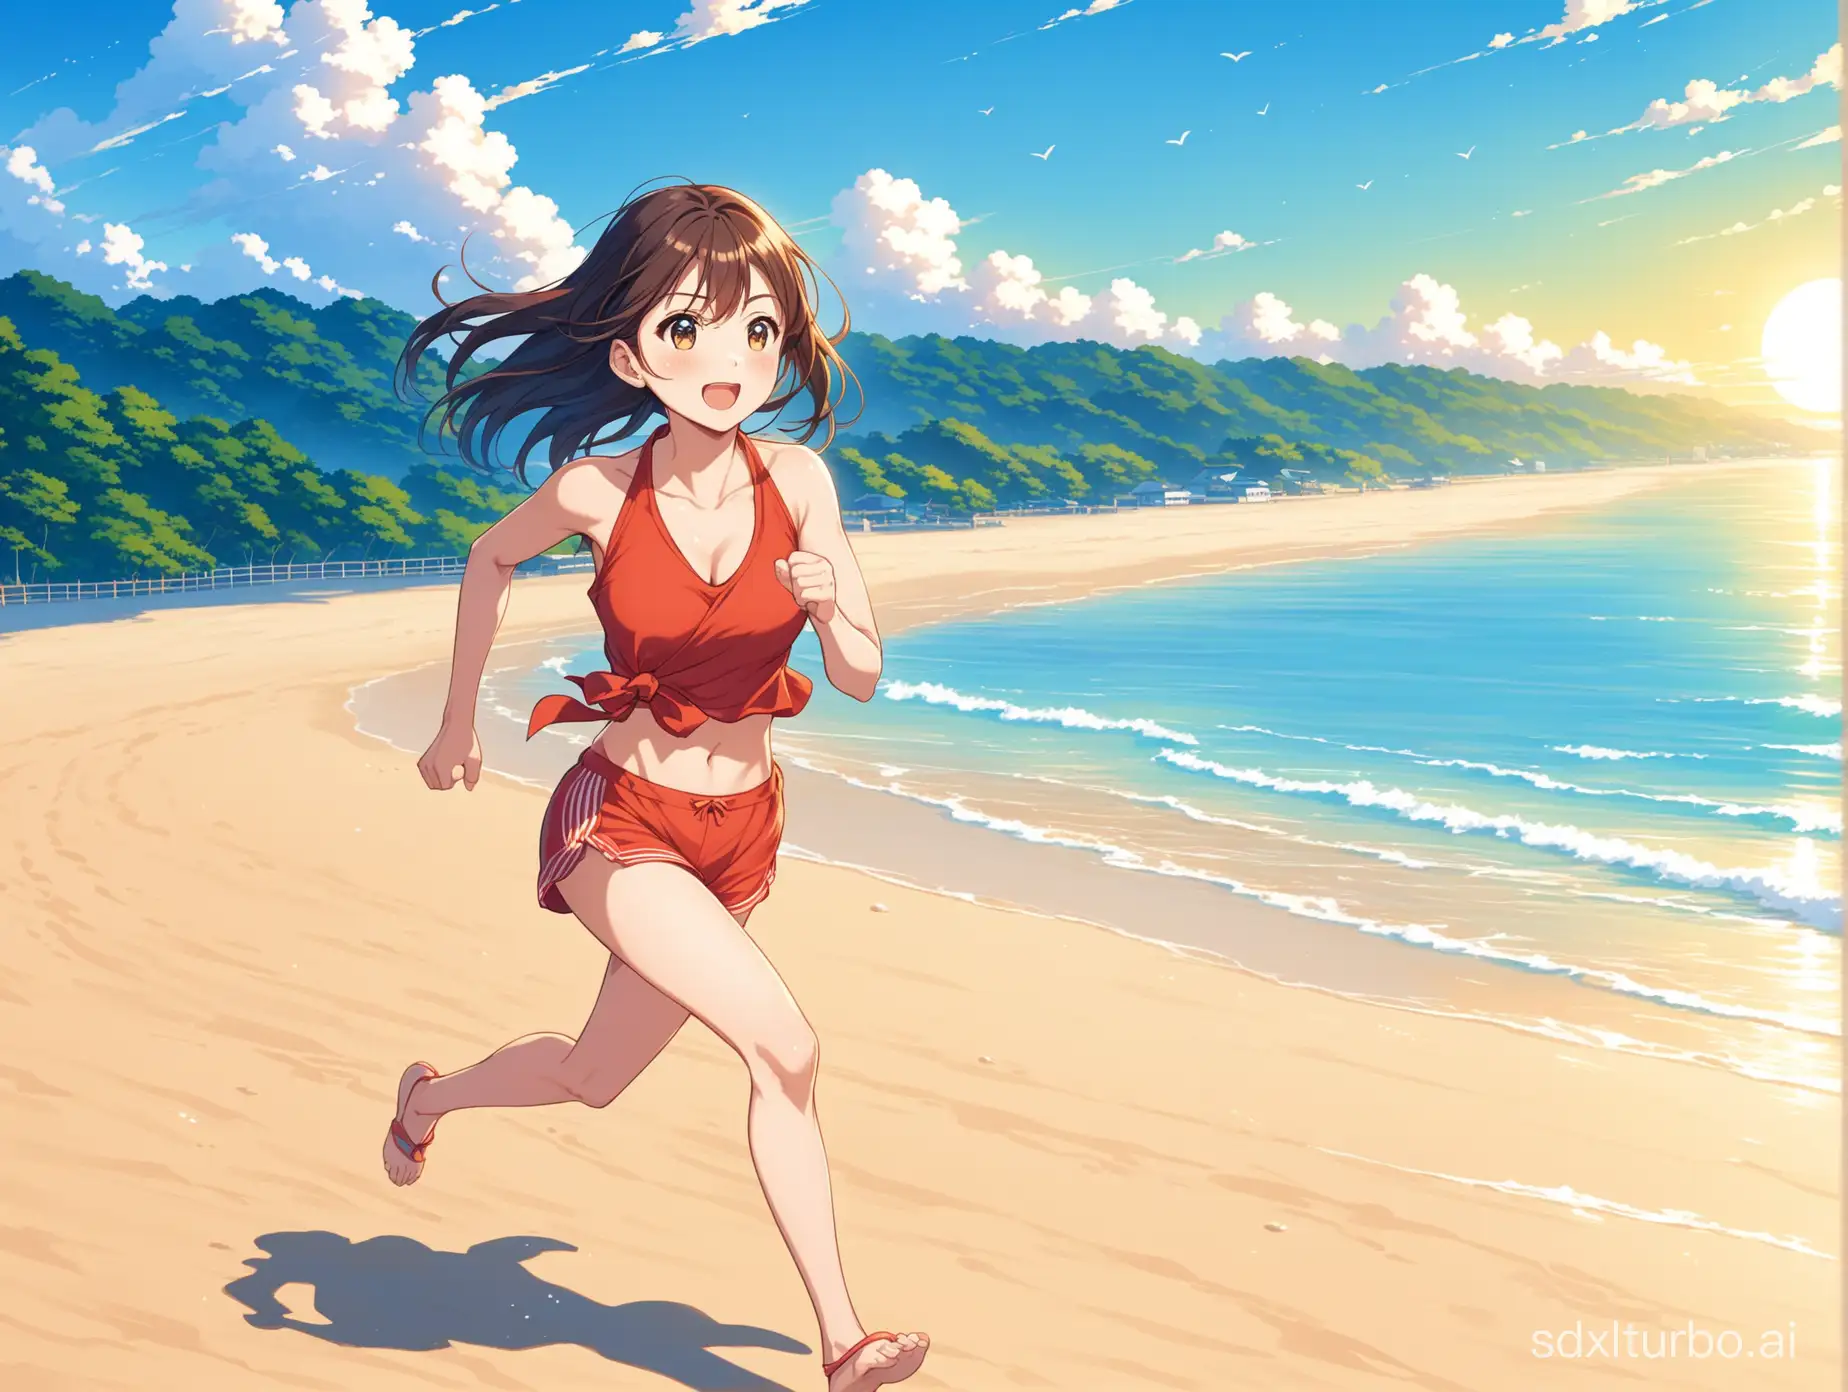 Japanese anime style，a girl is running At the beach